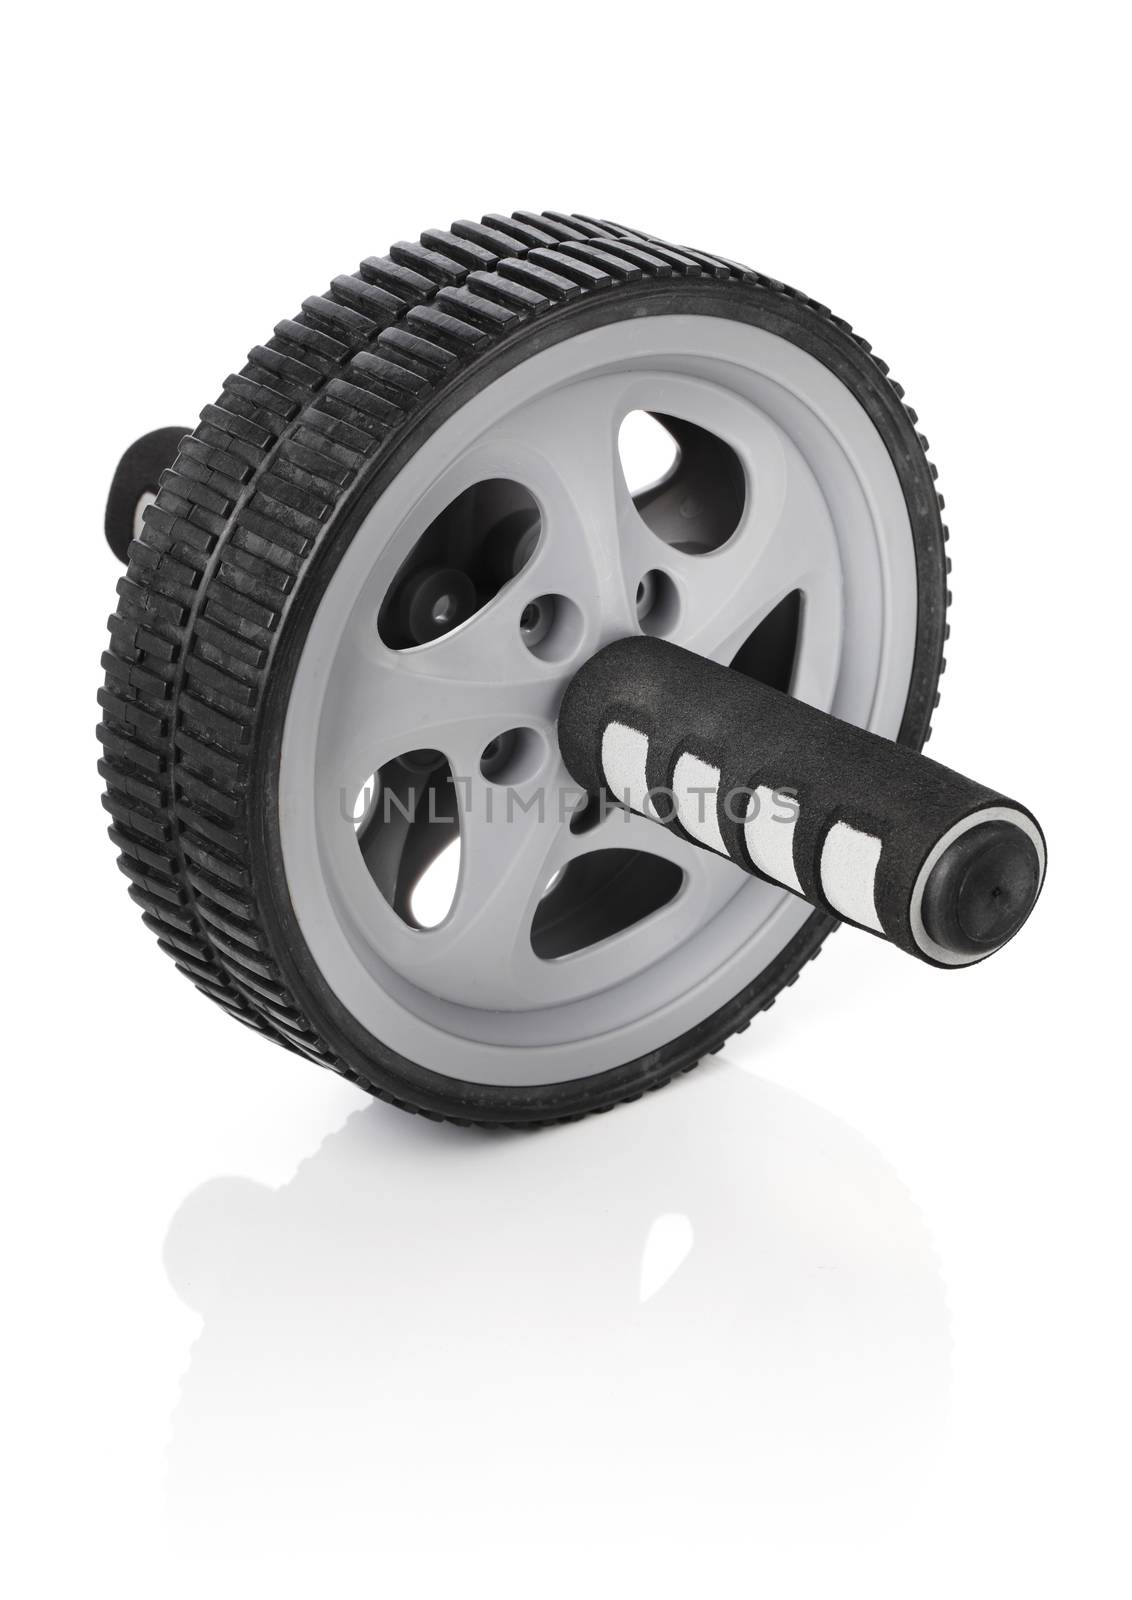 Ab roller wheel used for exercising abdominal muscles.